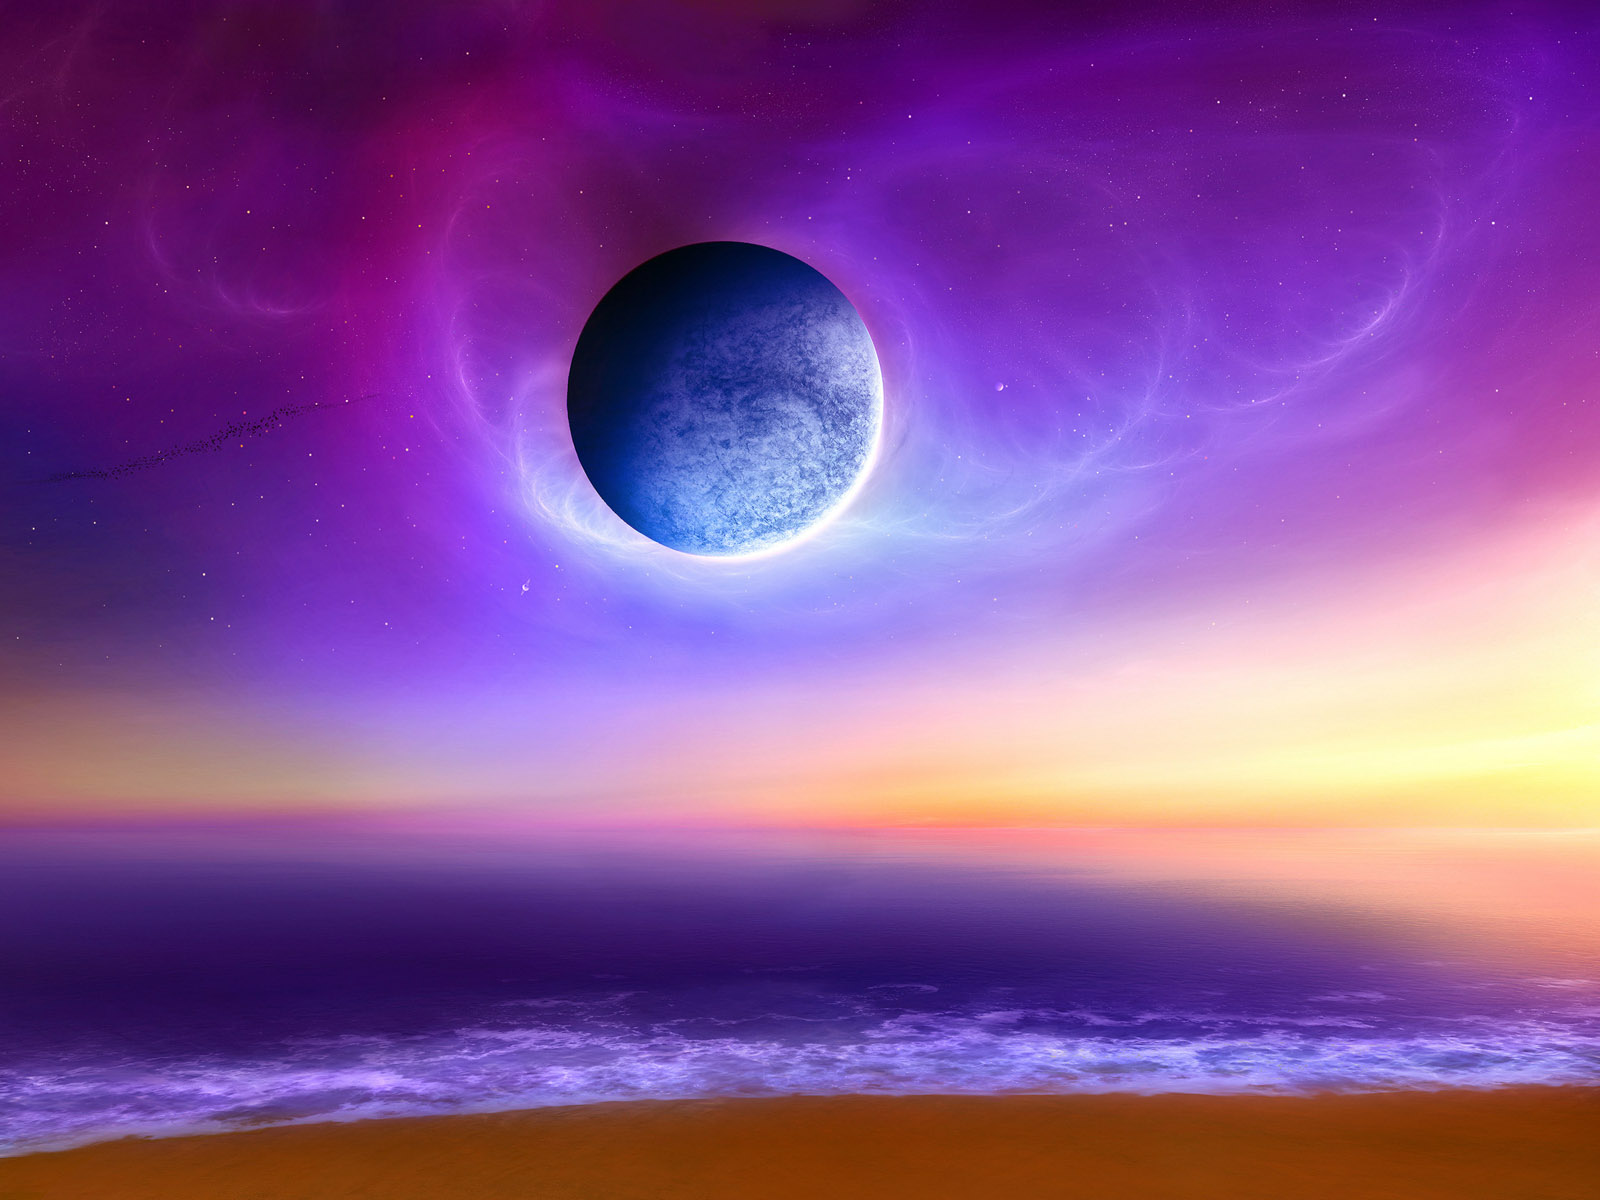 colorful space wallpaper,sky,nature,atmosphere,horizon,celestial event